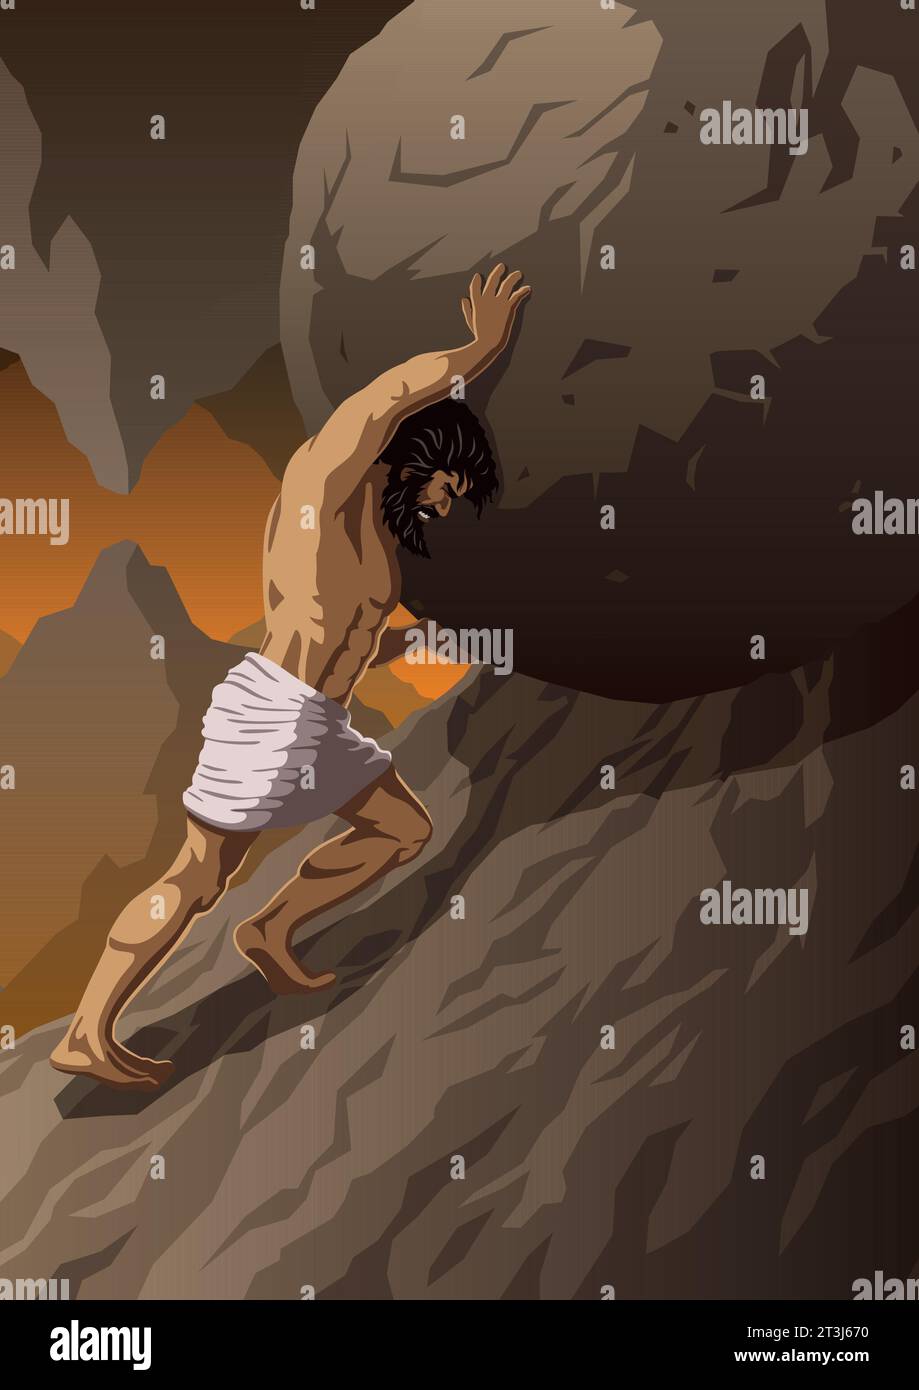 Sisyphus strains to push massive boulder uphill, against mountainous backdrop. His determined face reveals the endless torment of his punishment. Stock Vector